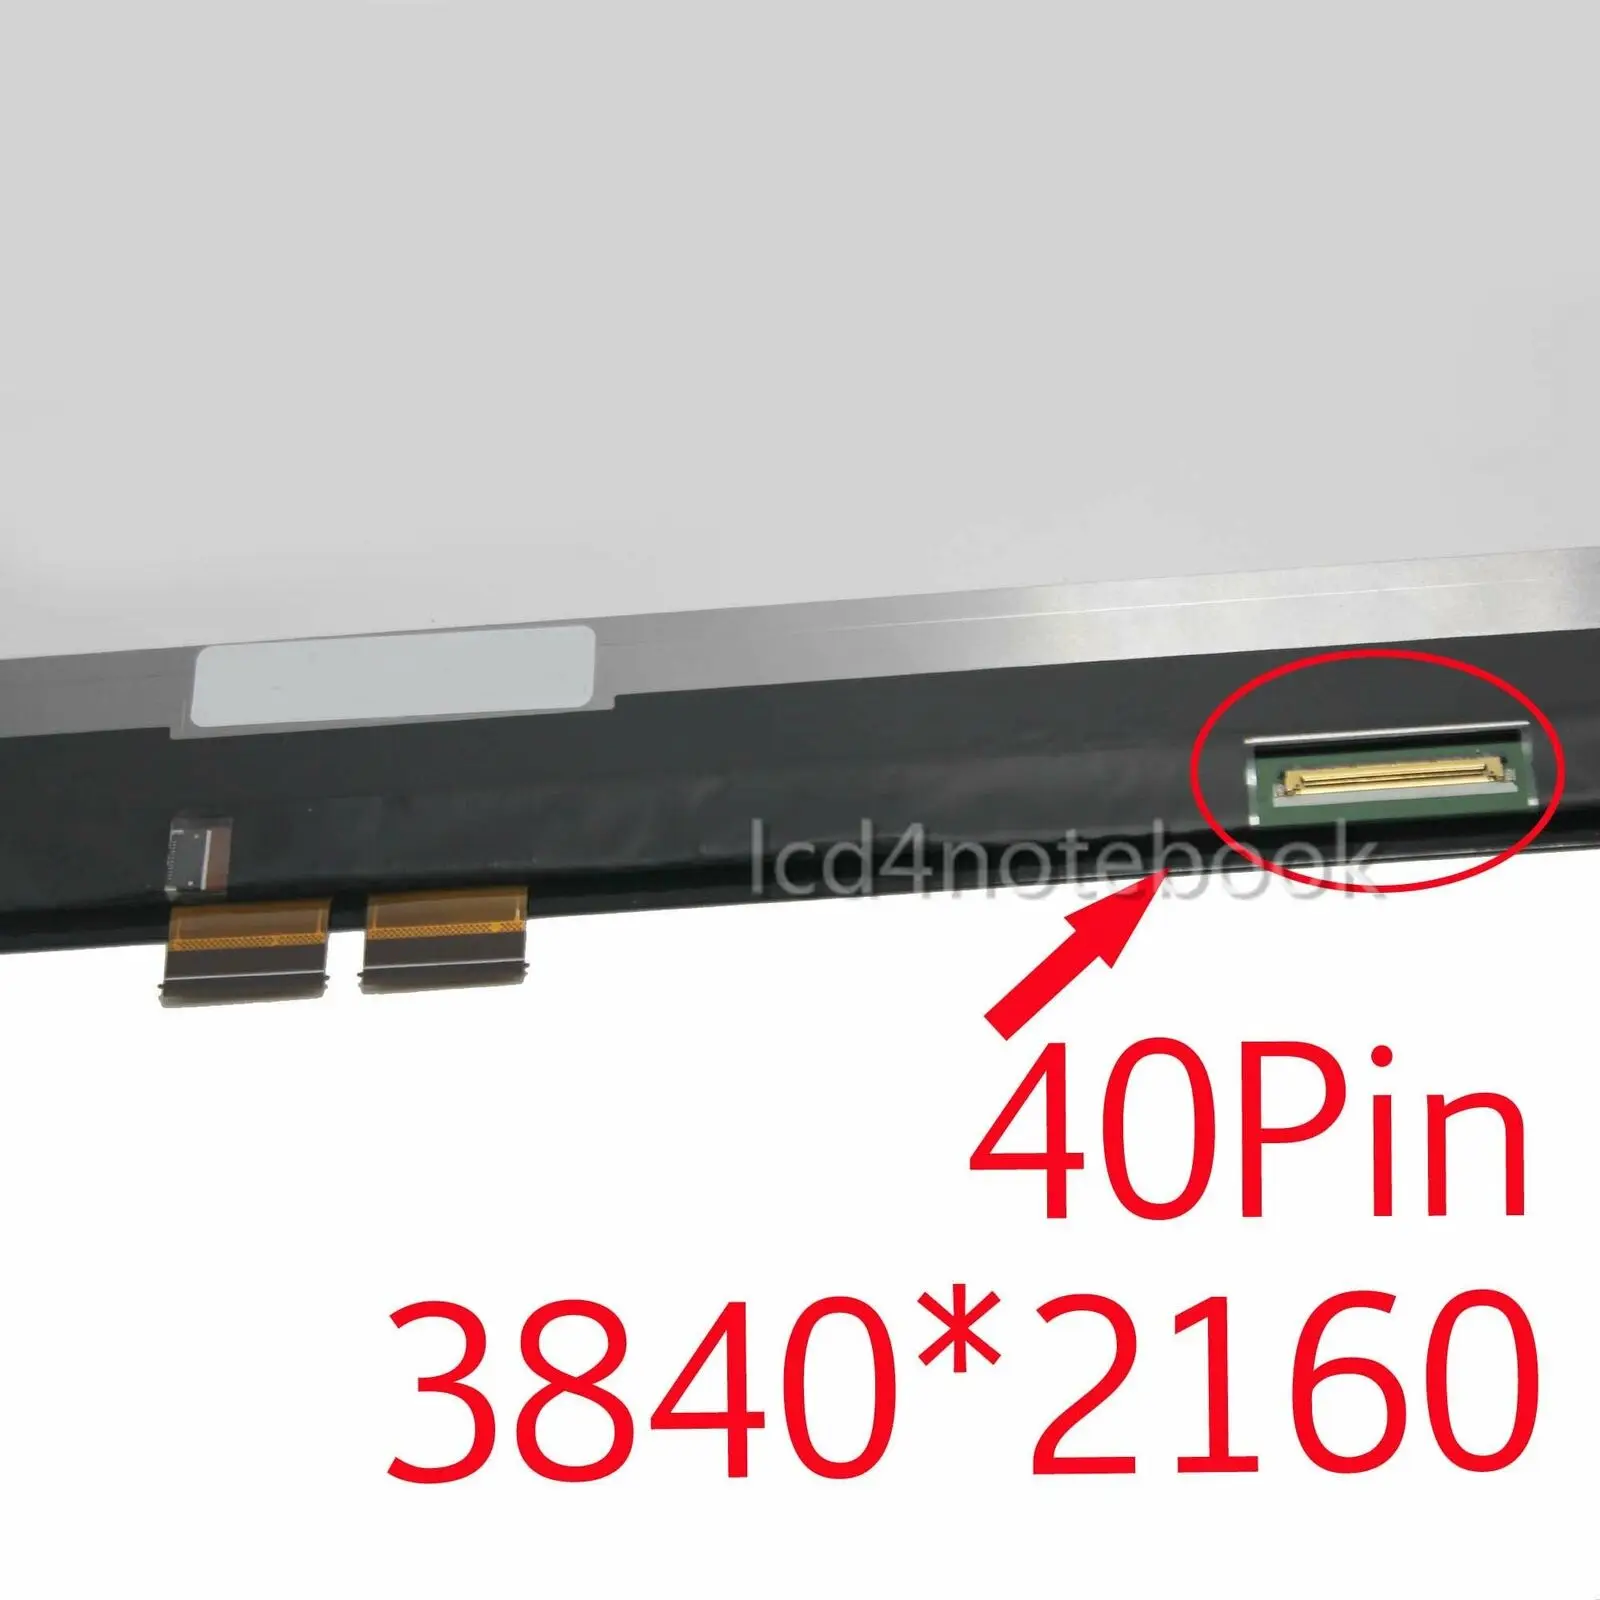 jianglun for lenovo yoga 710 15ikb 80v50009us 15 6 uhd lcd touch screen display assembly free global shipping